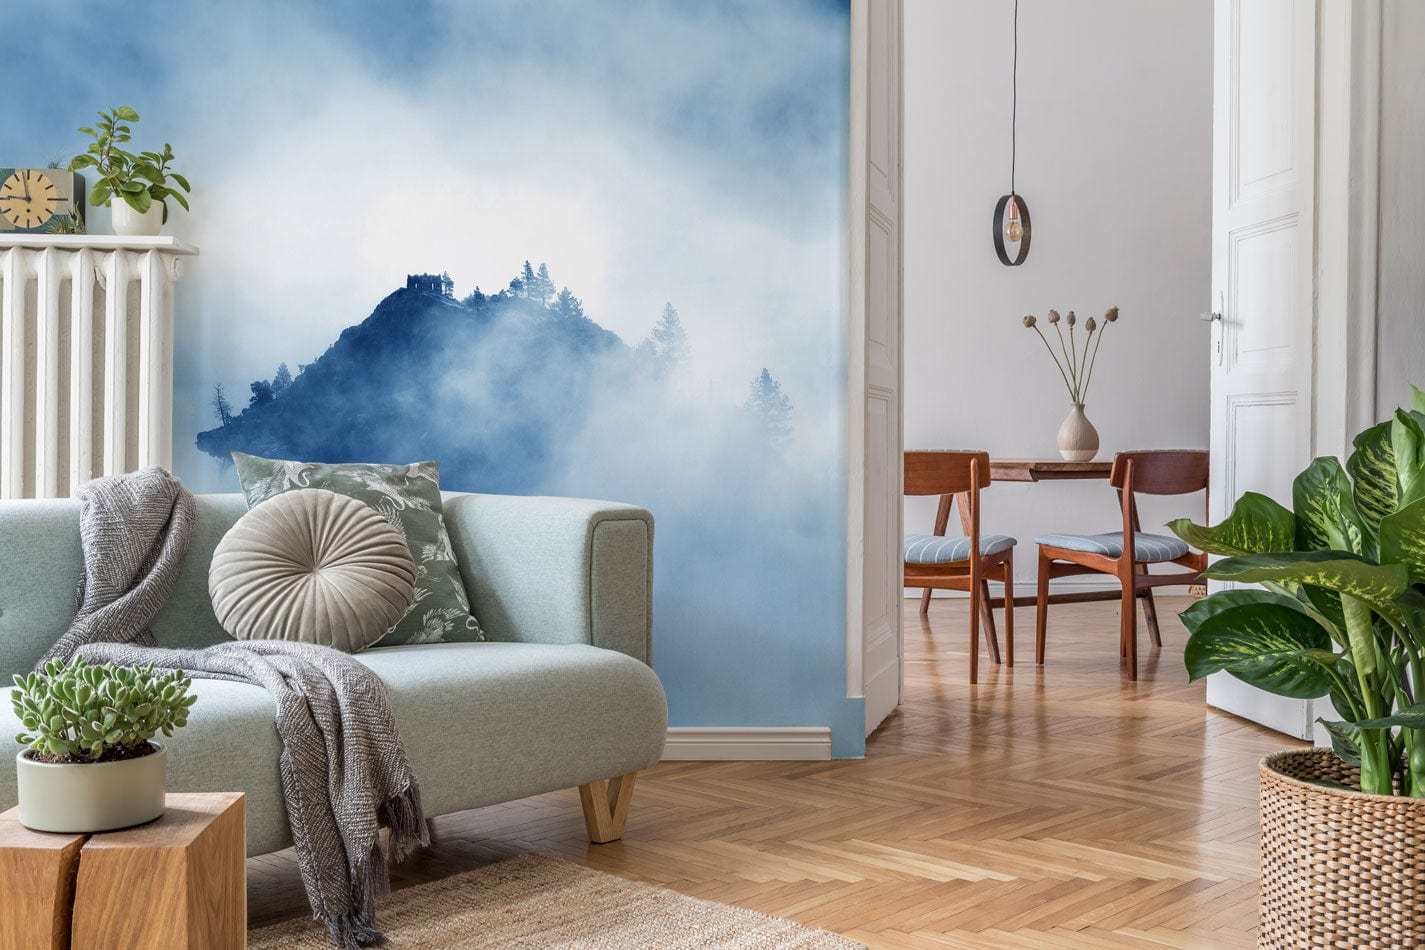 Wallpaper Mural for the Living Room Decor Featuring a Mysterious Foggy Forest